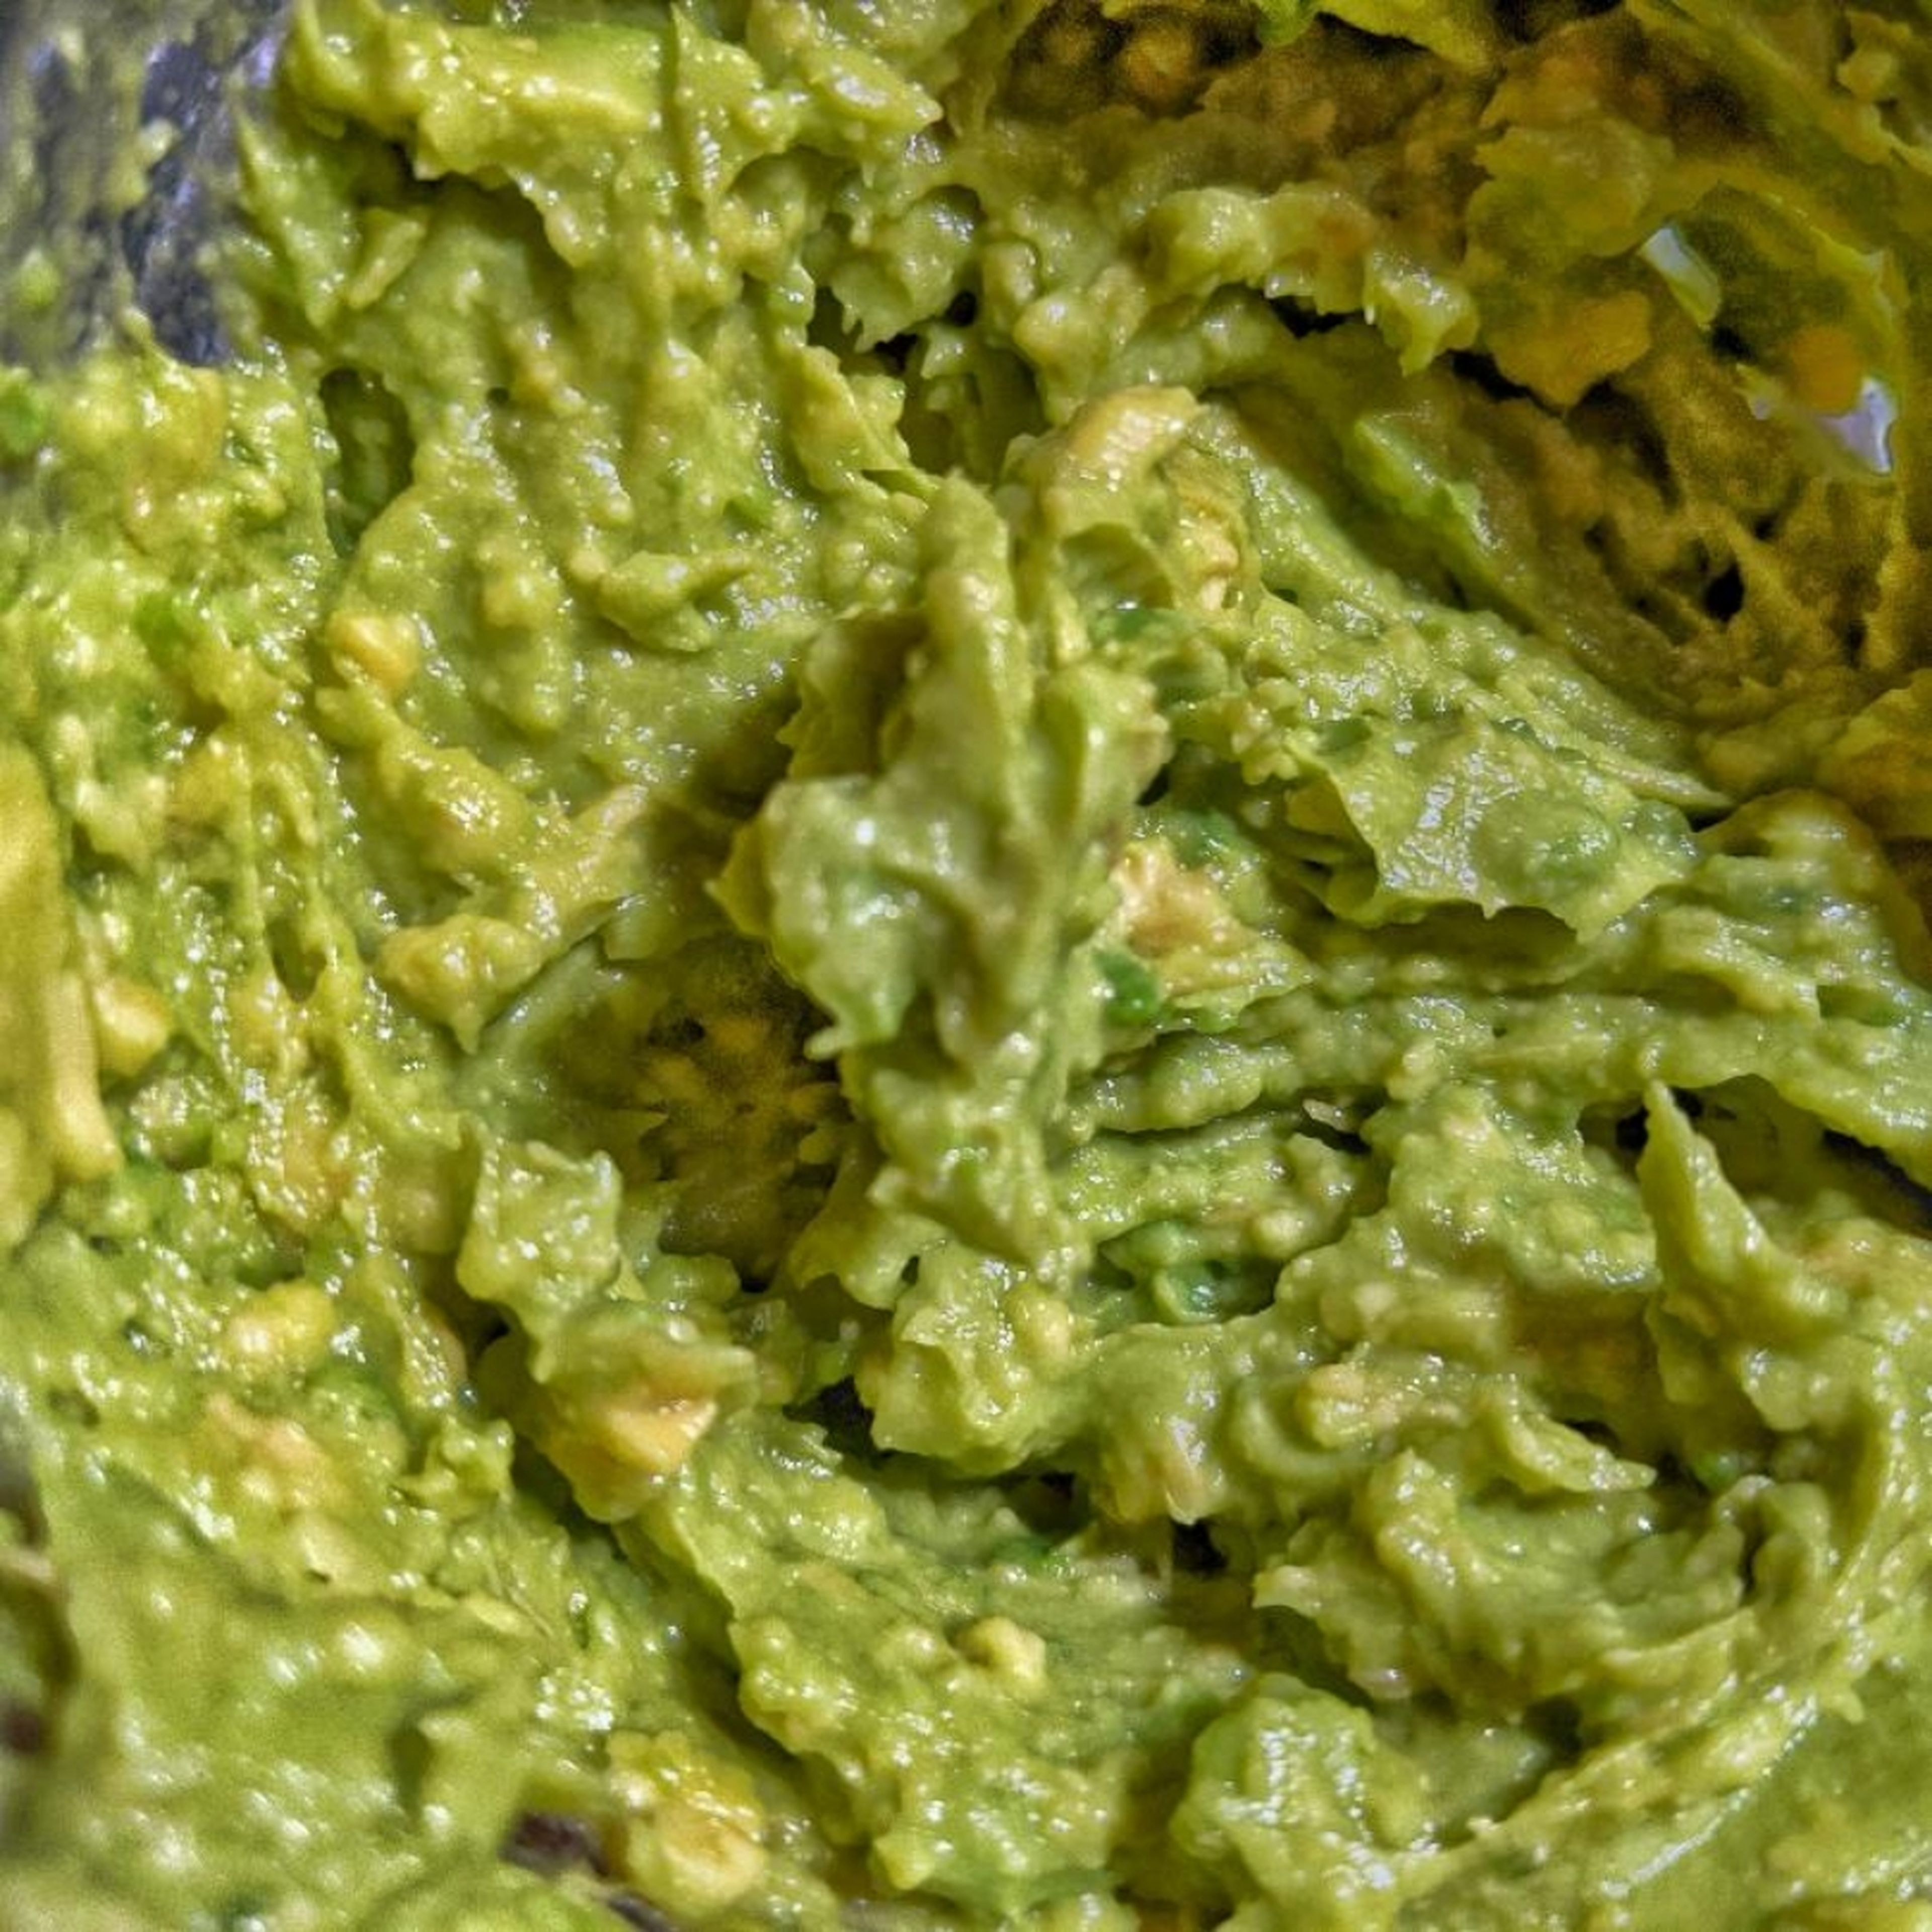 Halve and Mash avocado in a small bowl until desired smoothness.